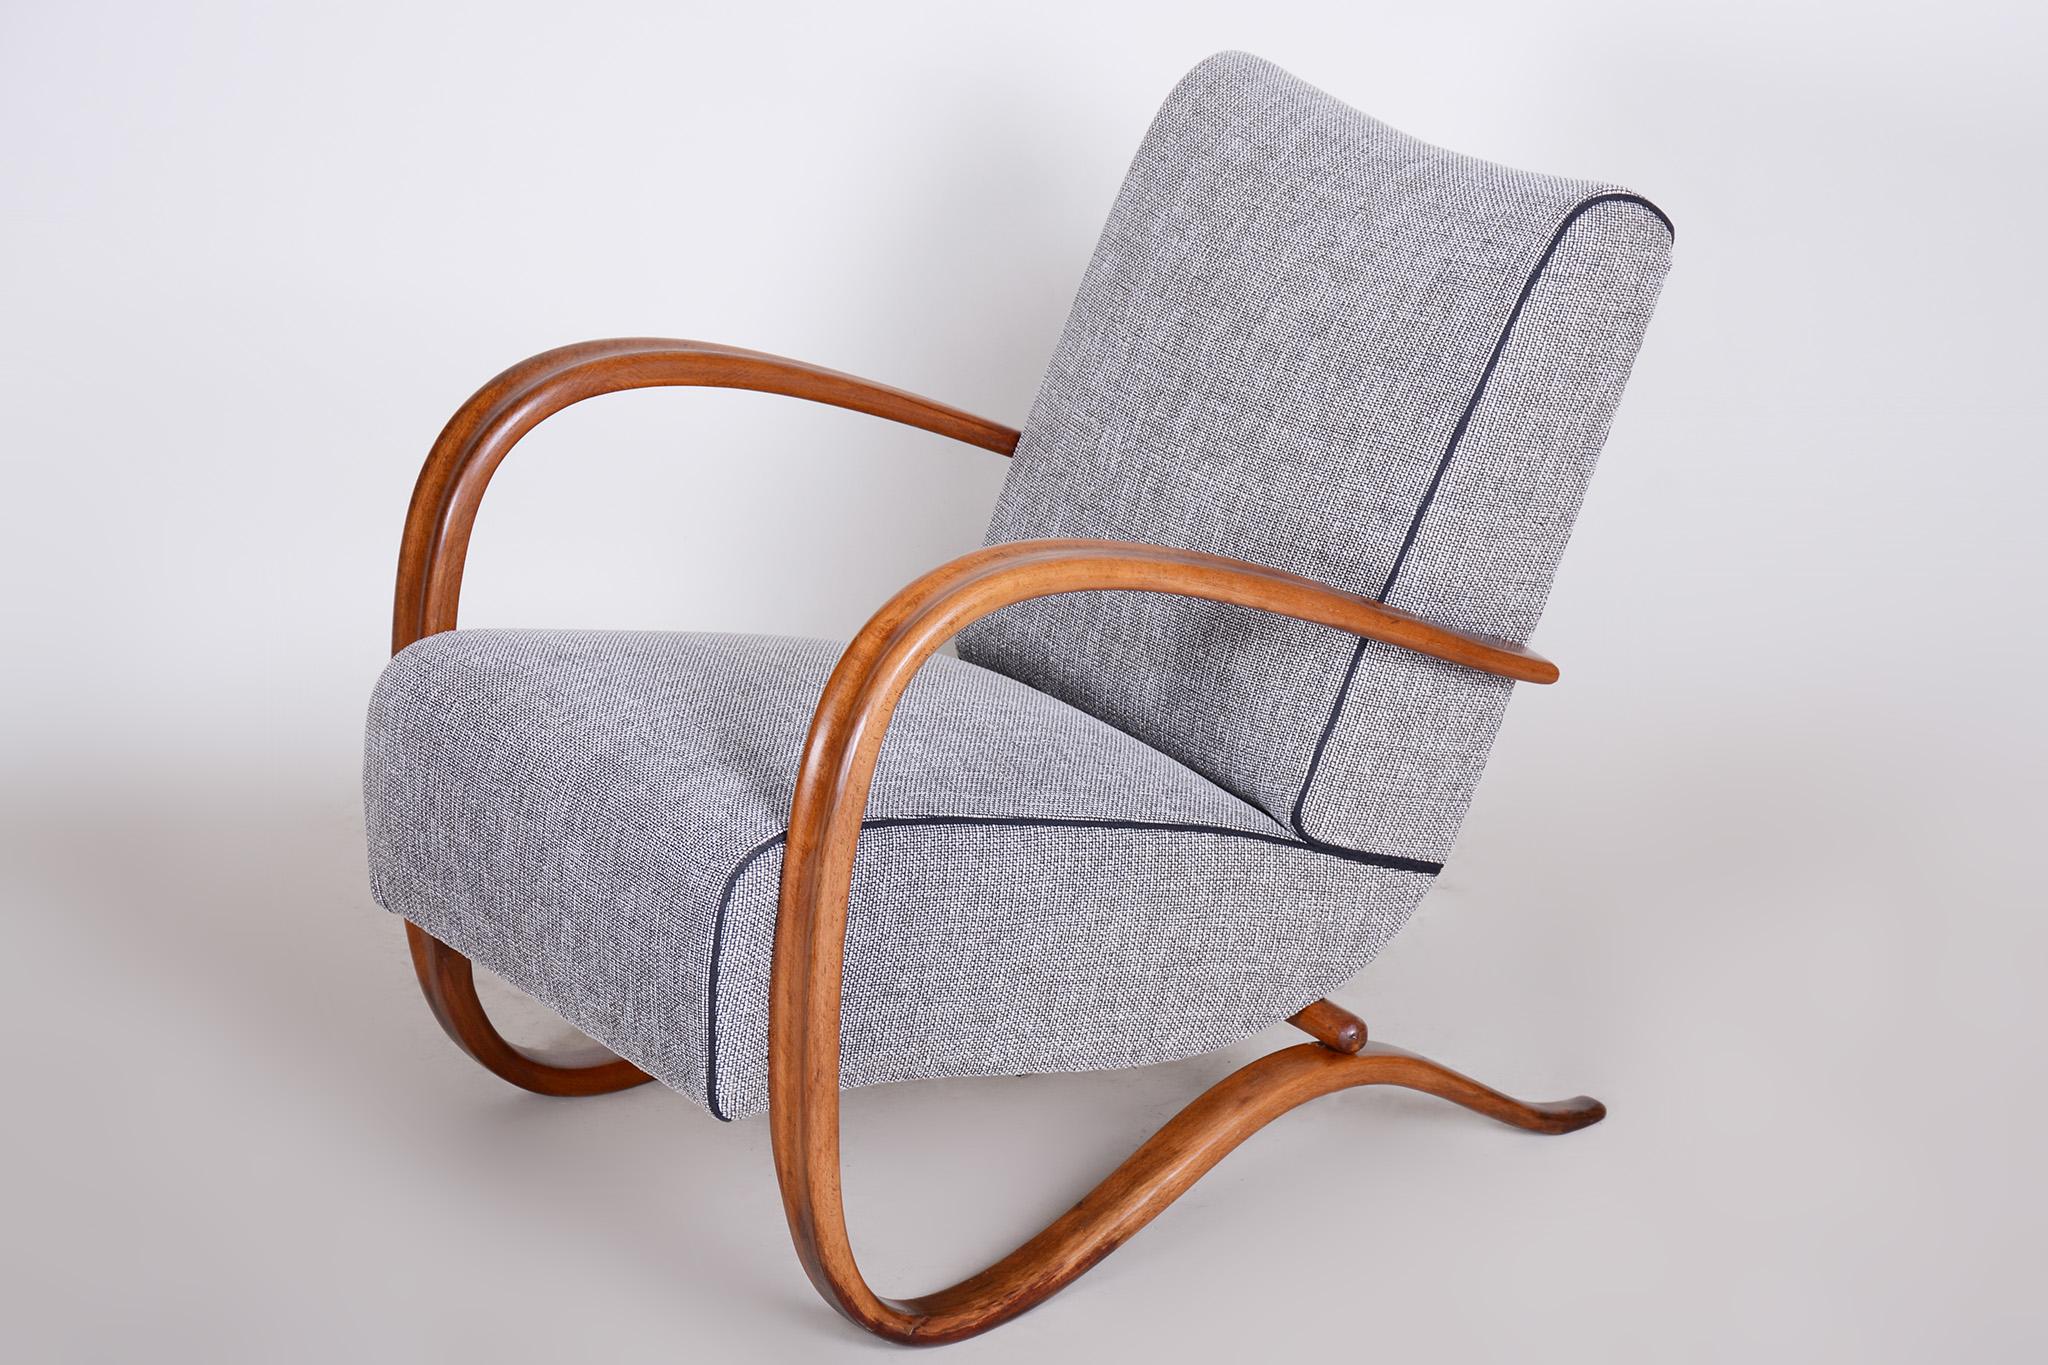 Fabric Halabala's H269 Armchair, Made in 1930s Czechia by Up Závody